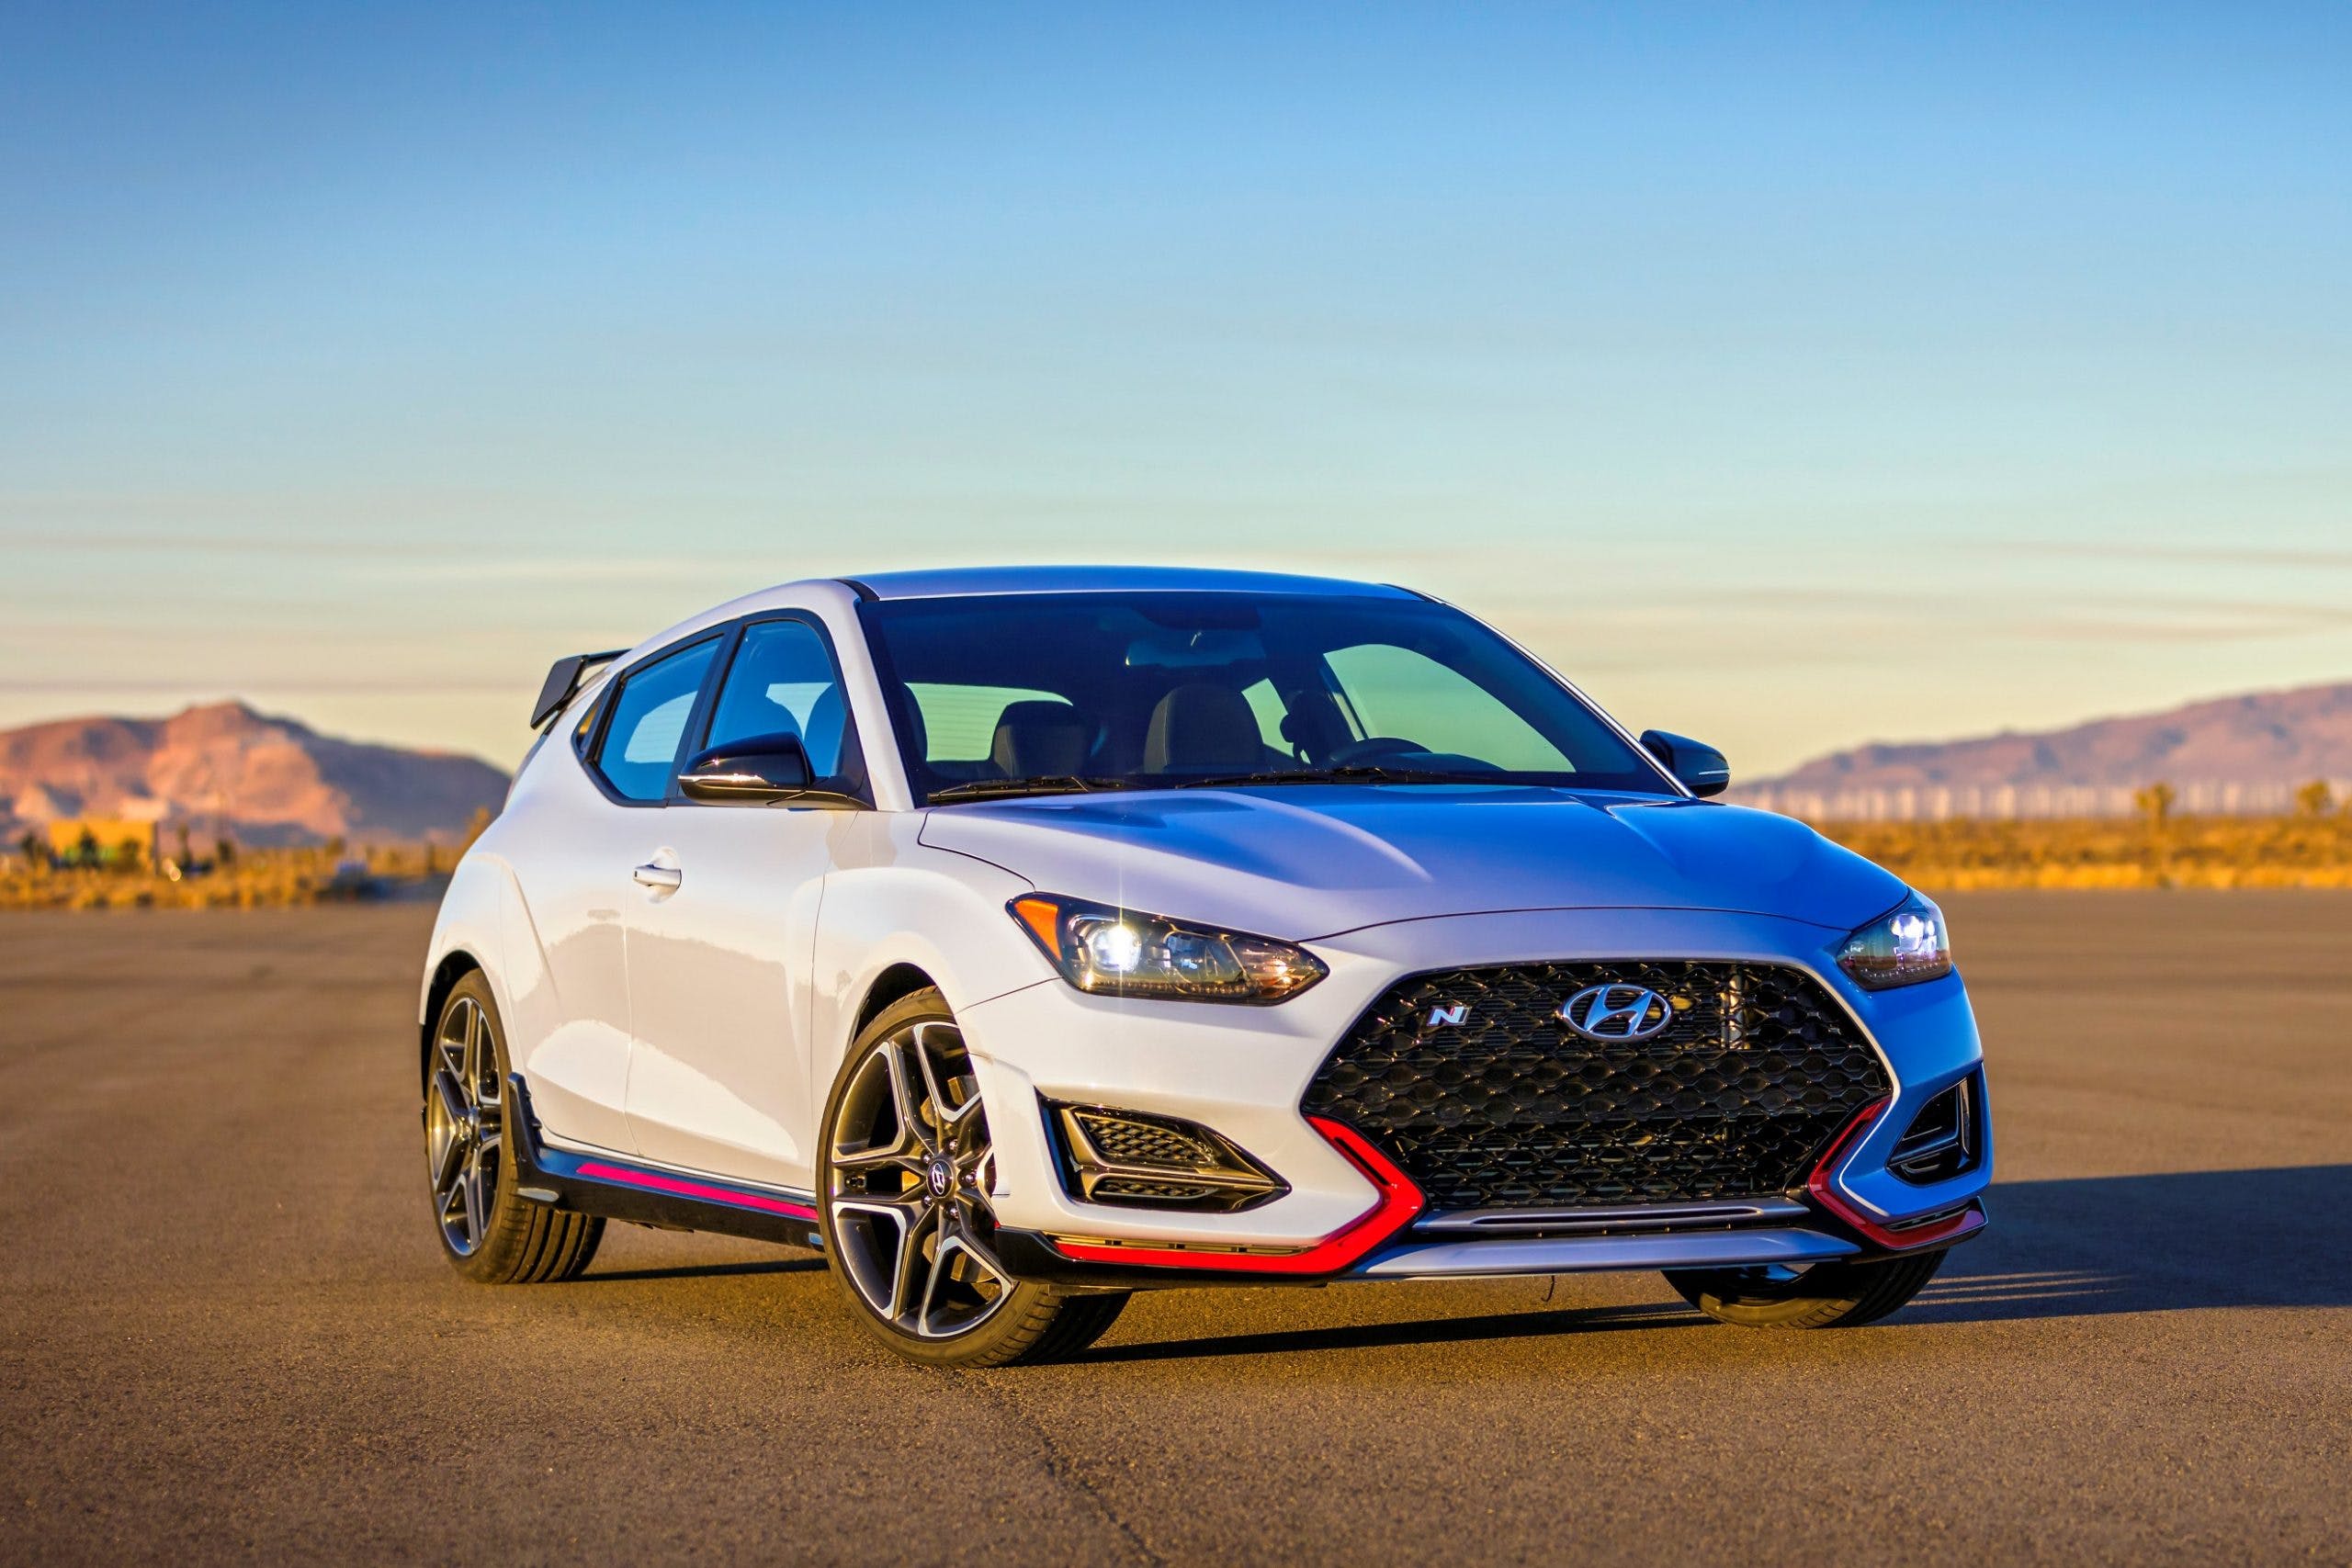 Test Drive: 2022 Hyundai Veloster N Review - CARFAX